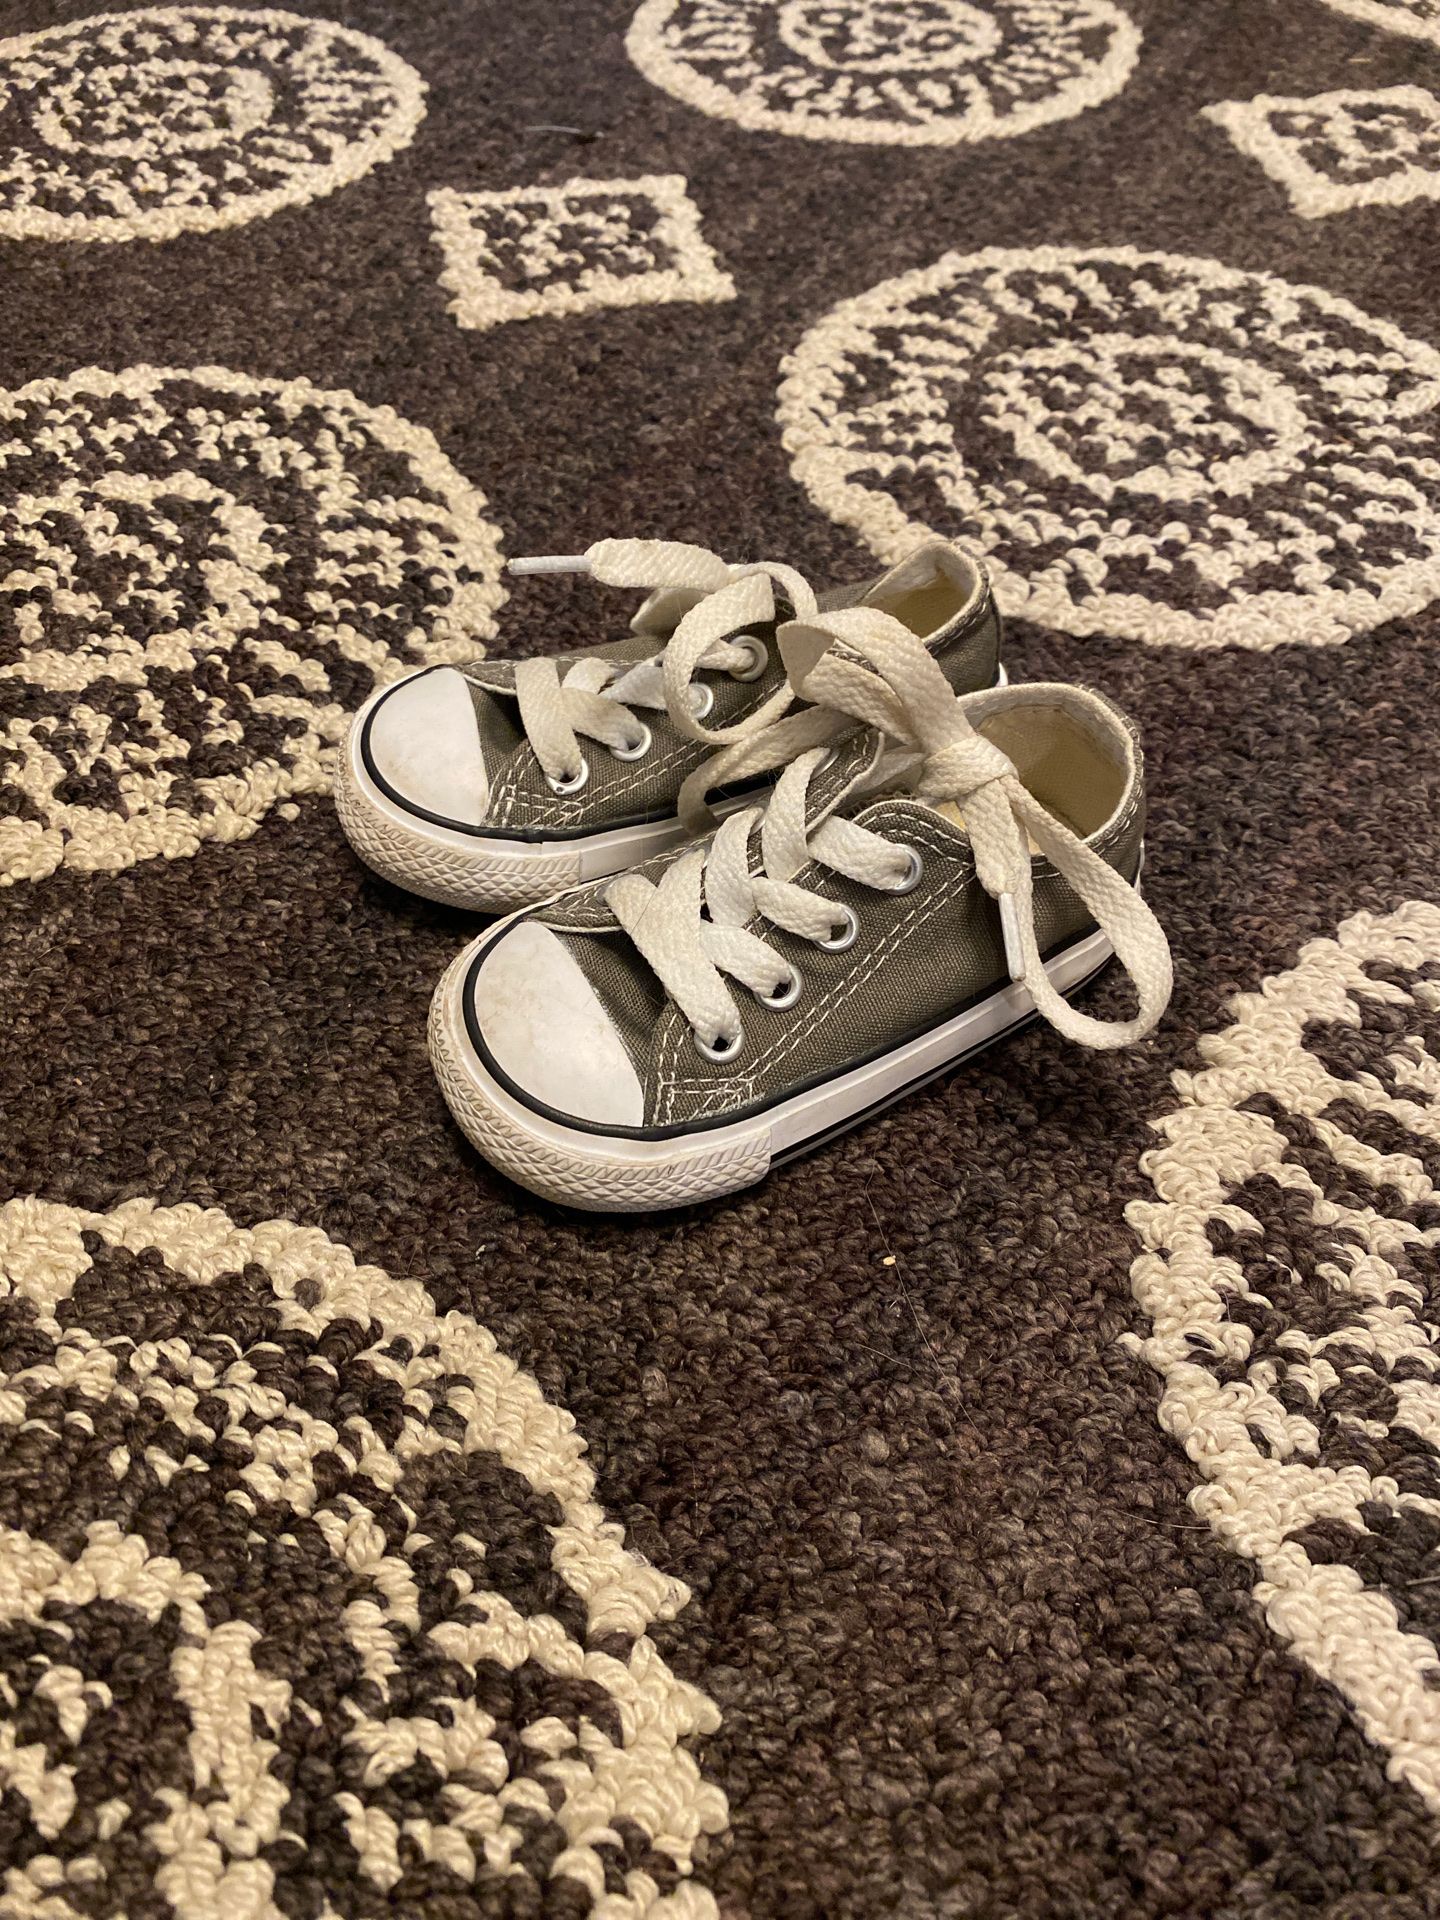 Converse baby shoe size 4